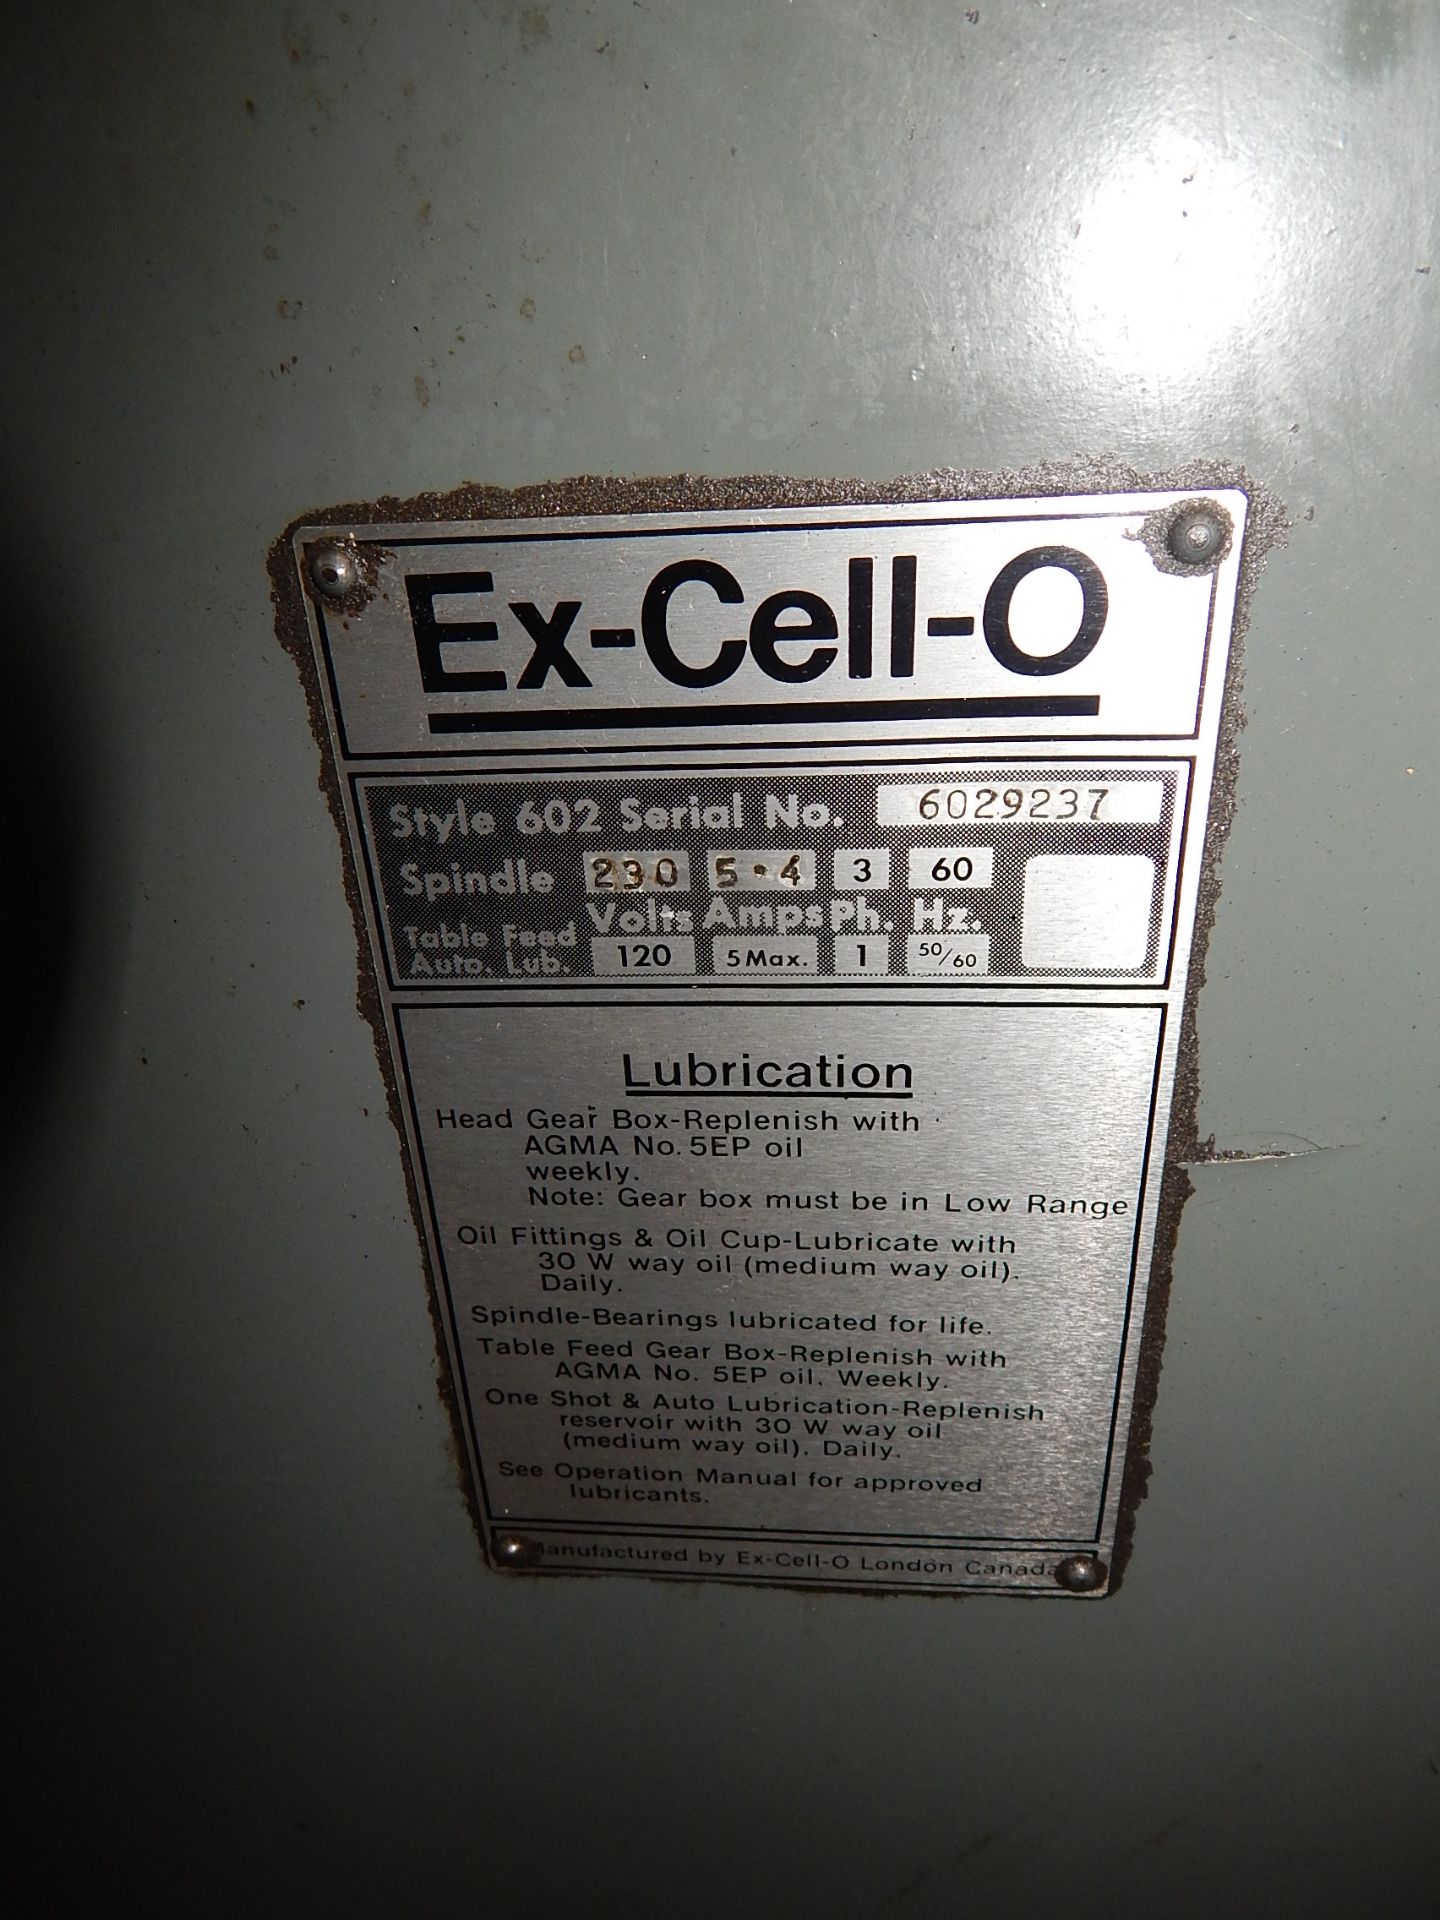 Ex-Cell-O Model 602 Vertical Mill, s/n 6029237, Mitutoyo D.R.O., Servo Power Table Feed - Image 11 of 11